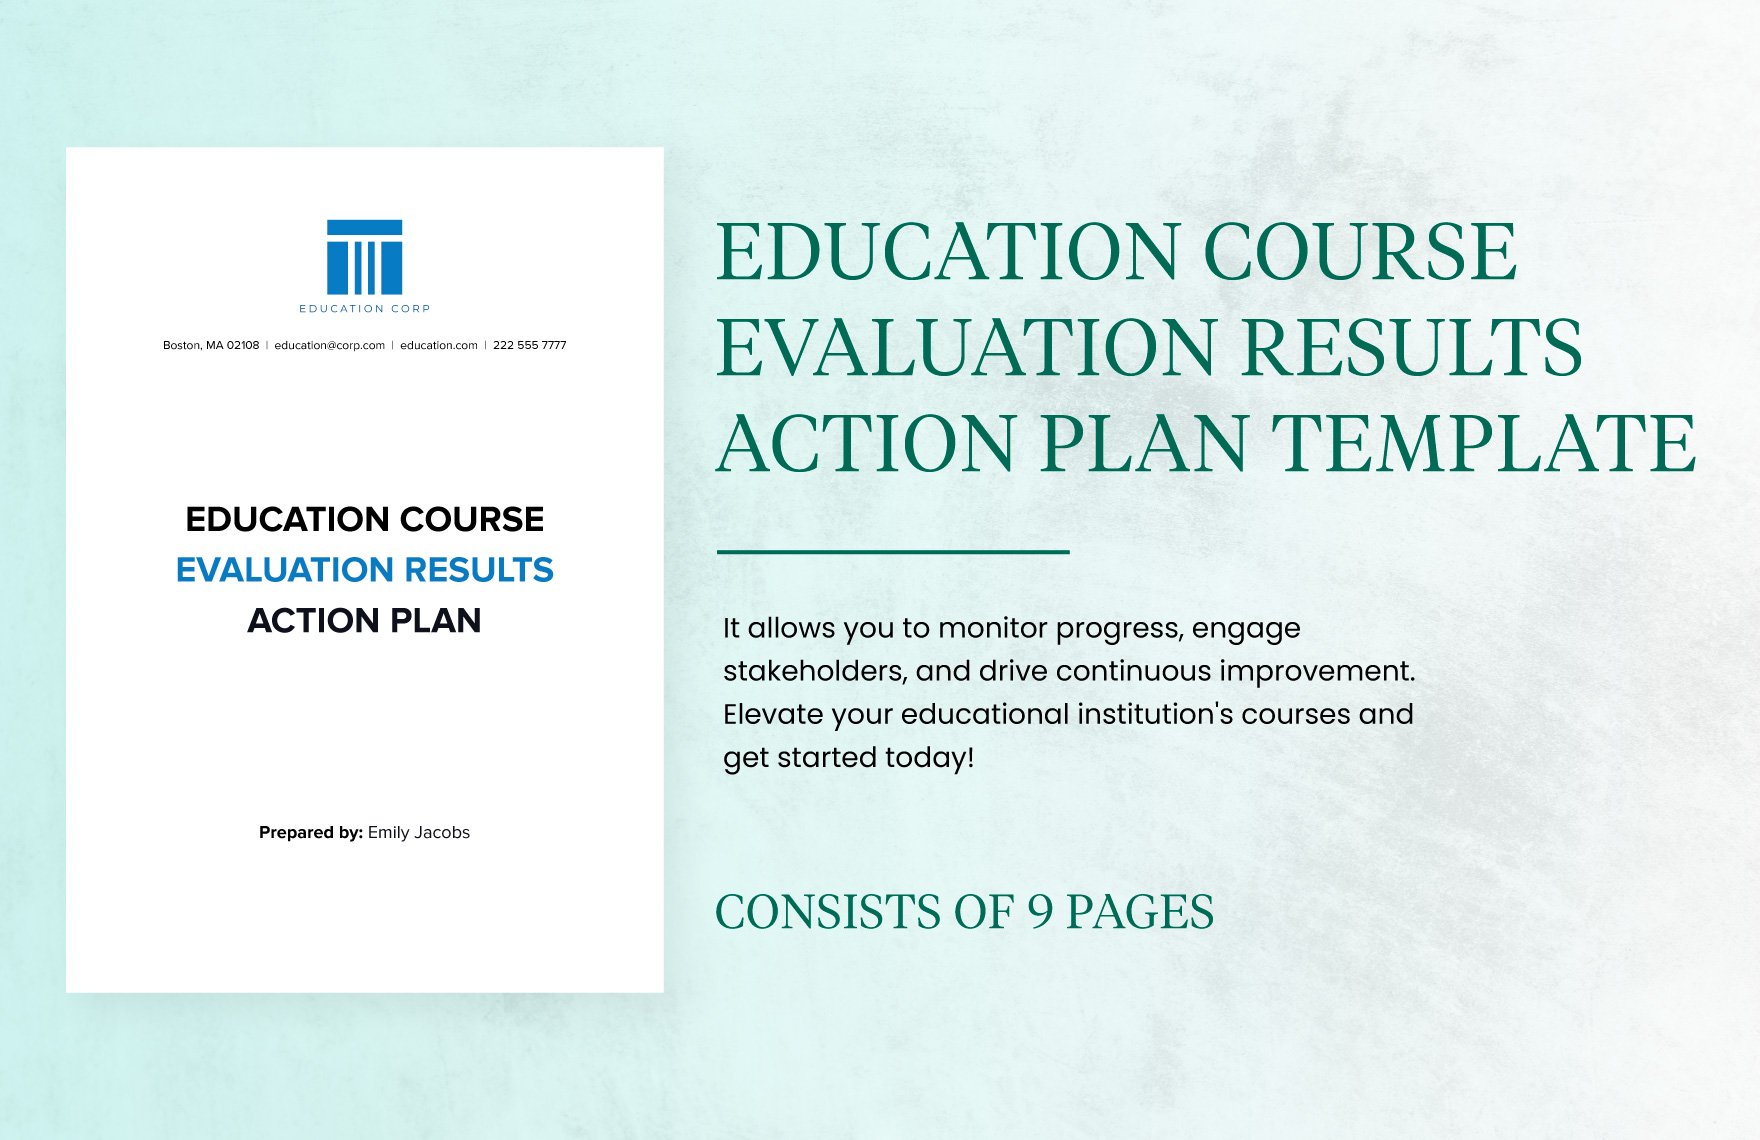 Education Course Evaluation Results Action Plan Template